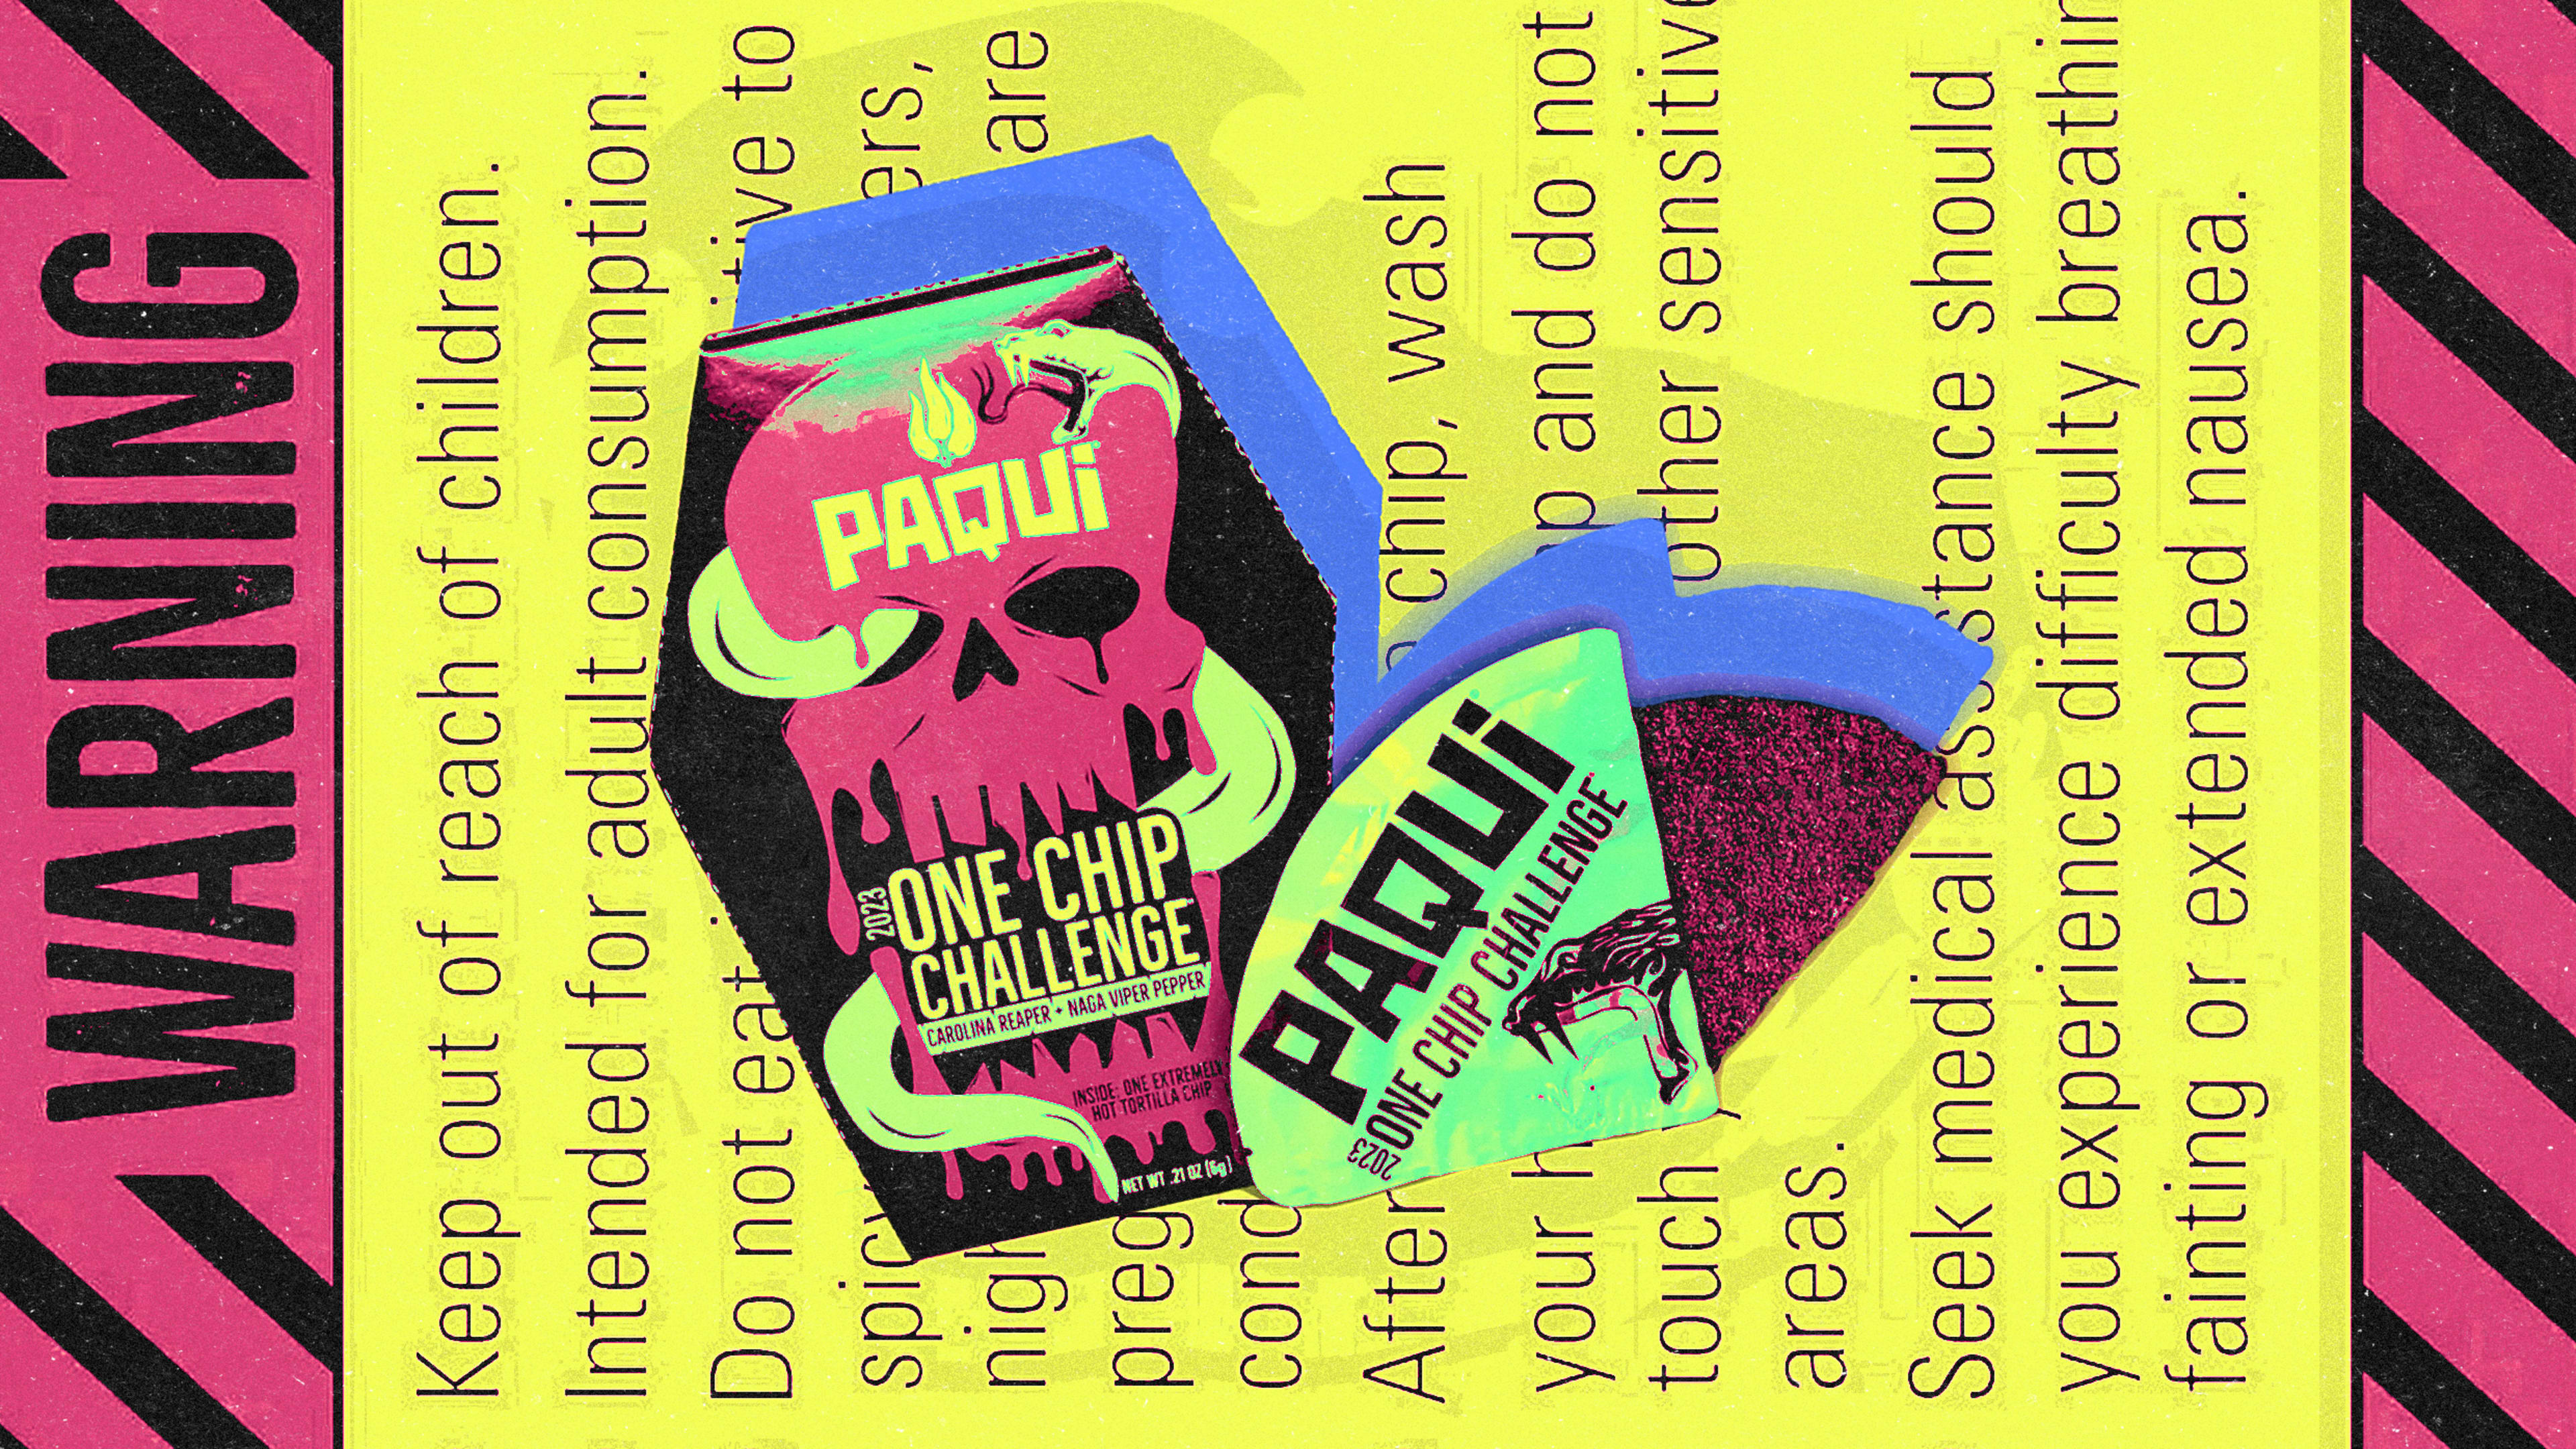 Edgy branding helped make Paqui’s One Chip Challenge a TikTok craze—and a brand disaster